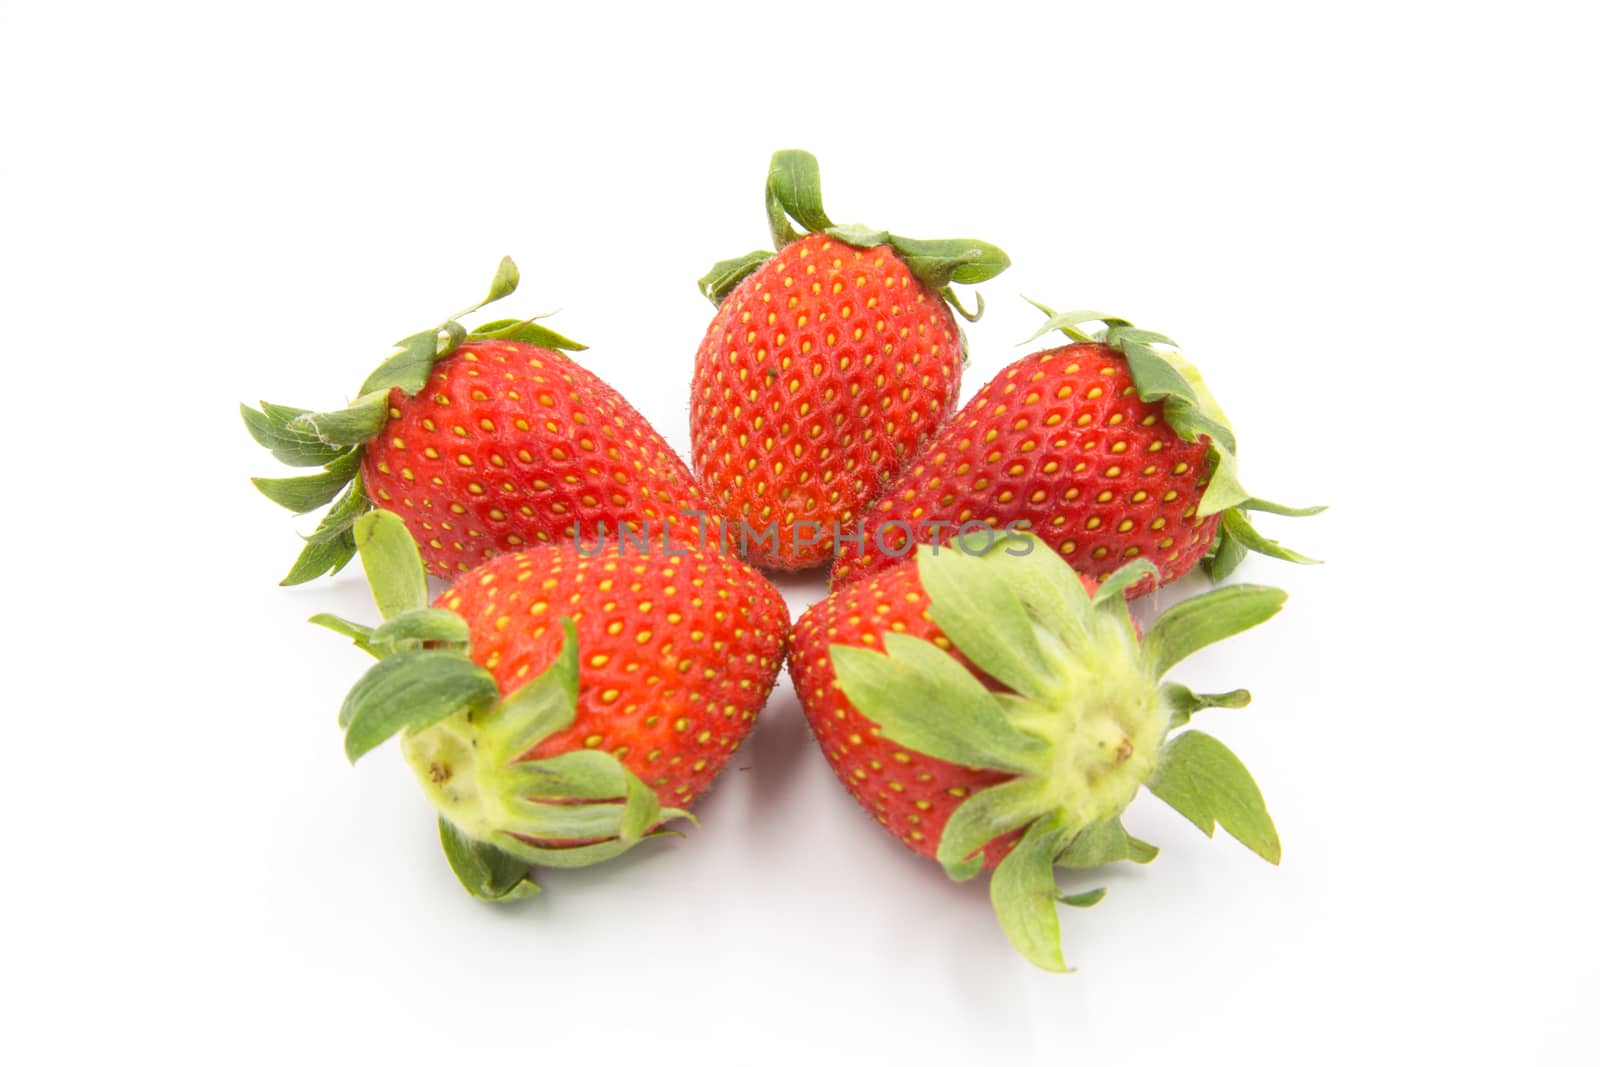 Five strawberries placed on a white background.